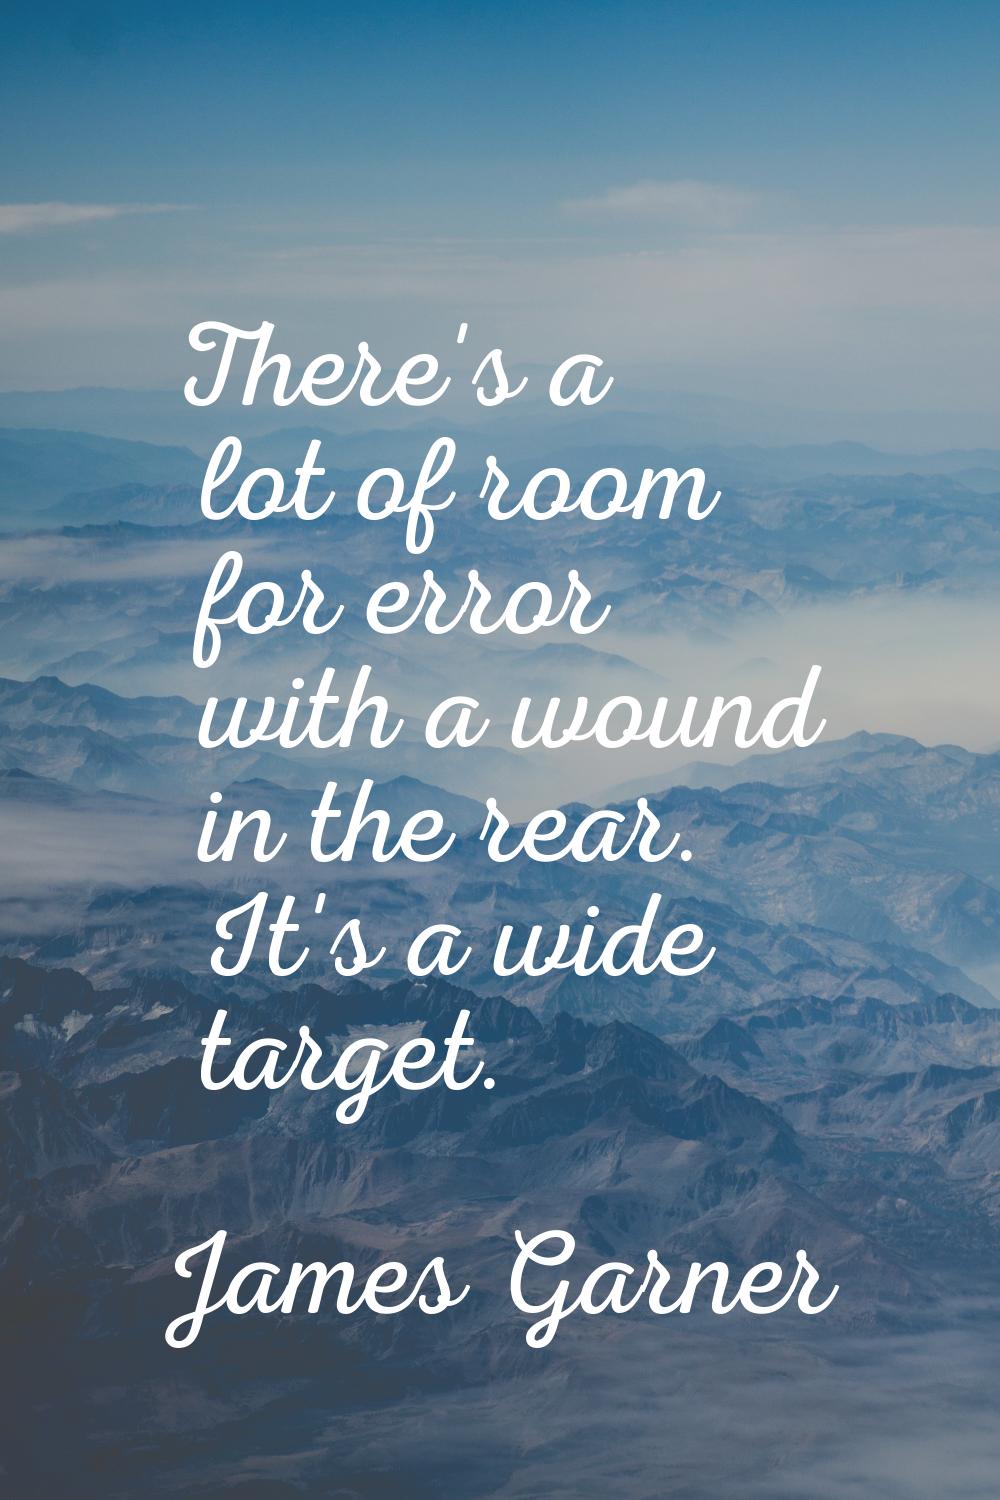 There's a lot of room for error with a wound in the rear. It's a wide target.